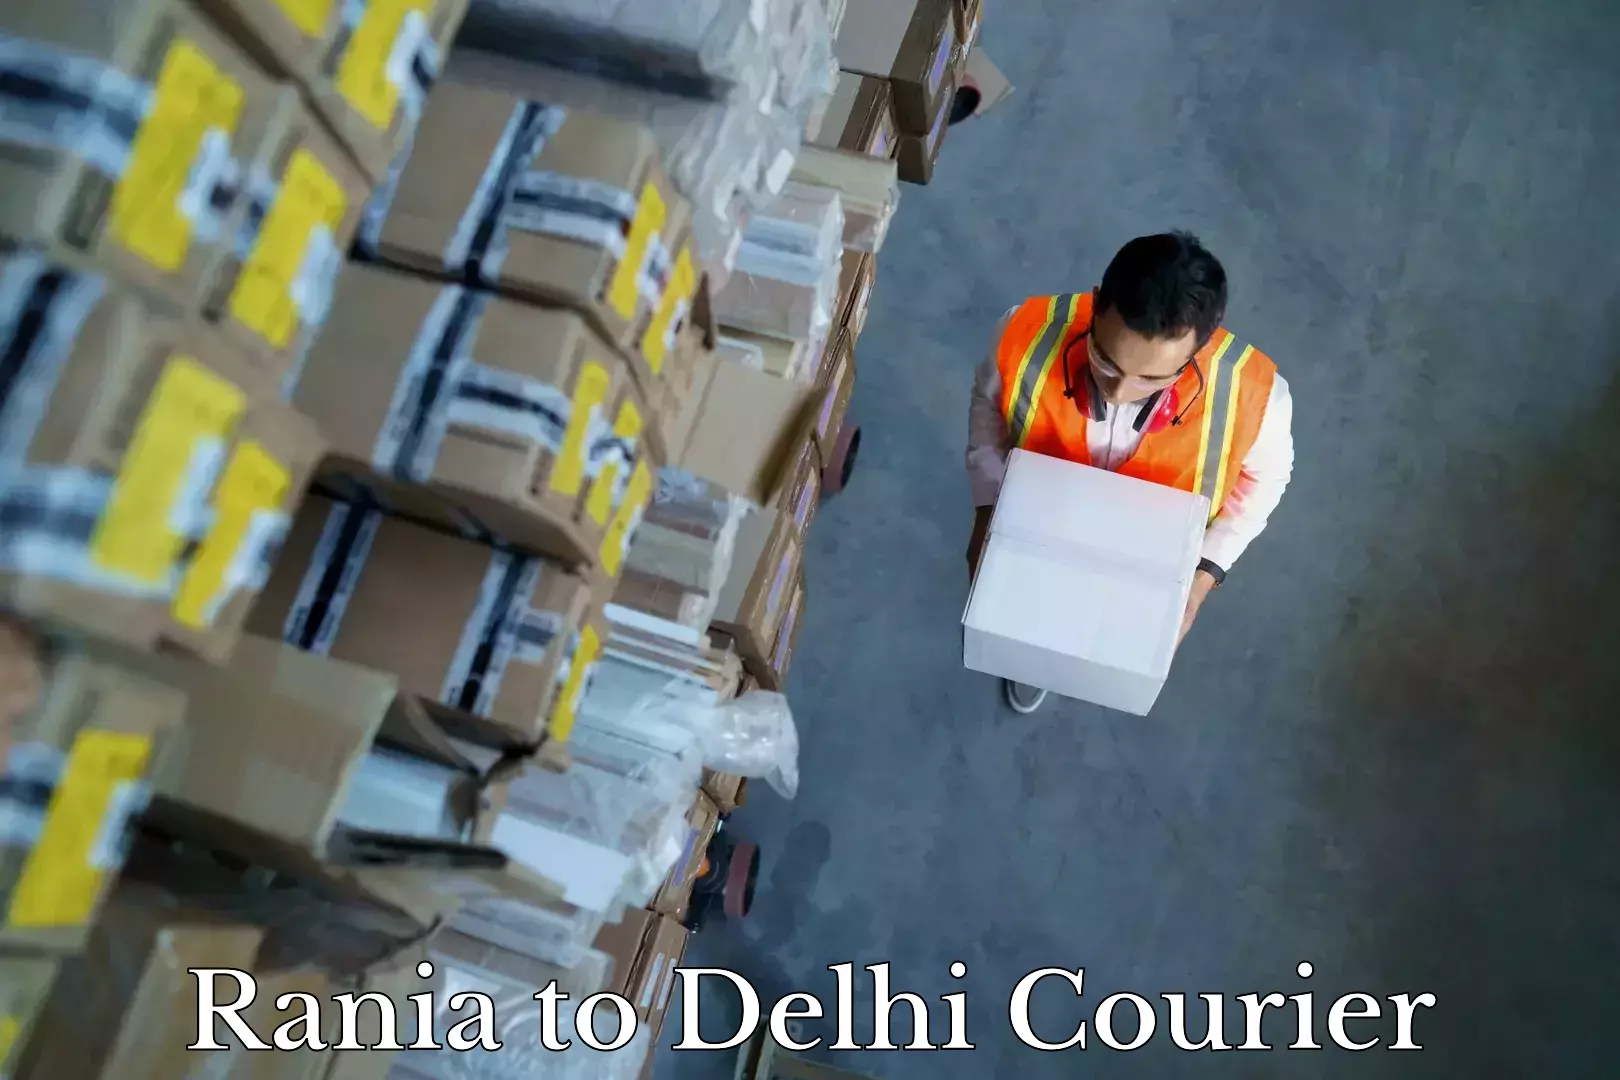 Trusted relocation experts Rania to Delhi